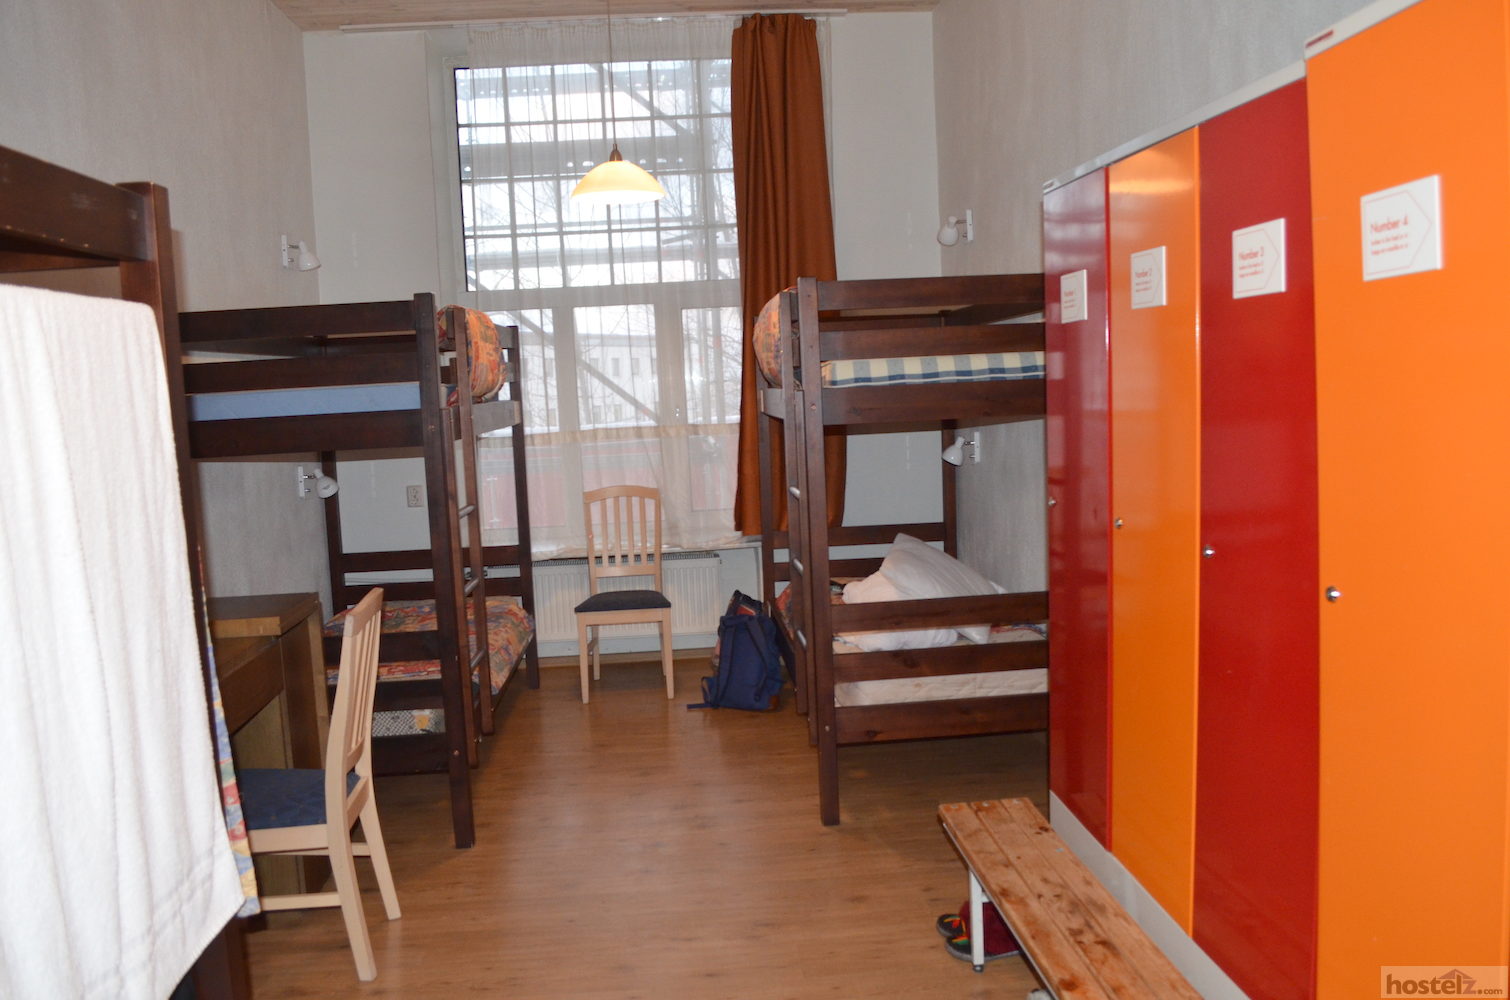 6-bed female dormitory